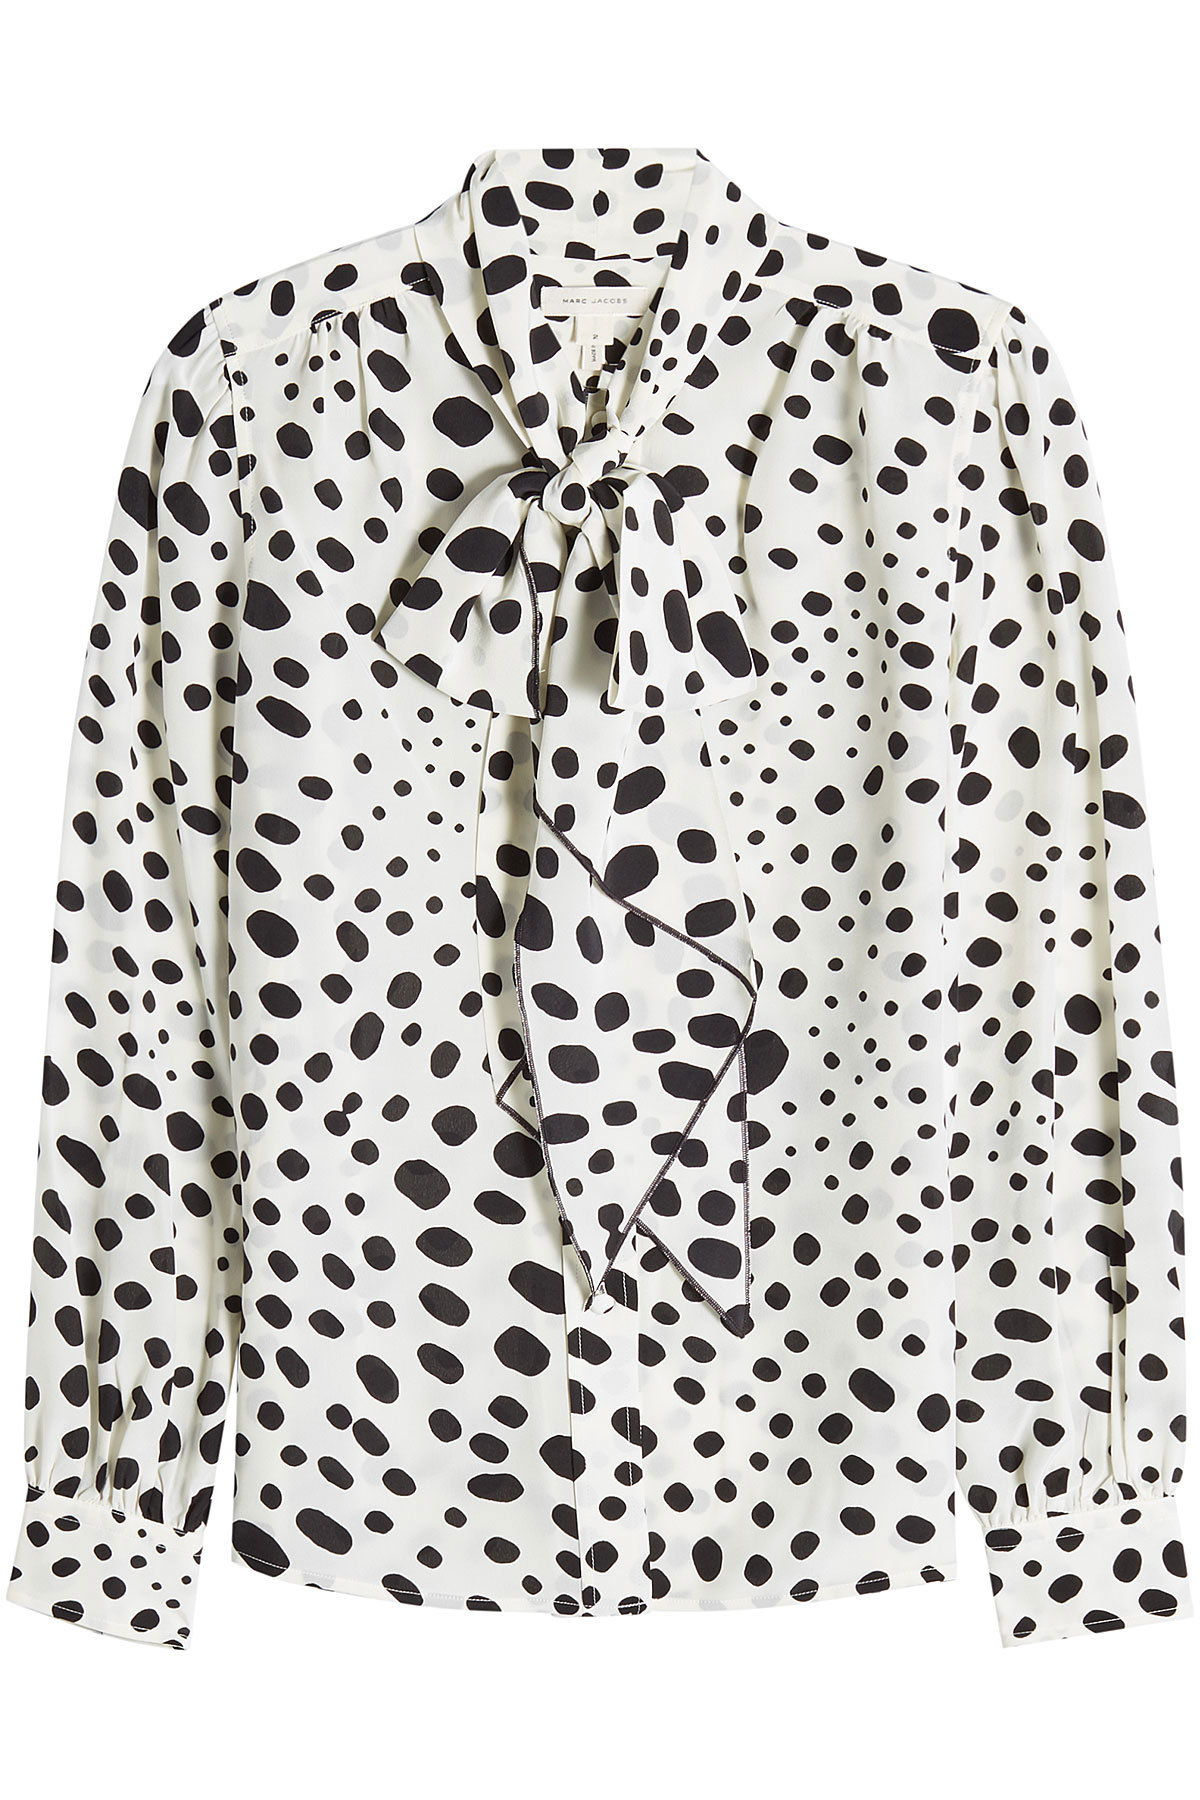 Marc Jacobs - Printed Silk Blouse with Pussybow